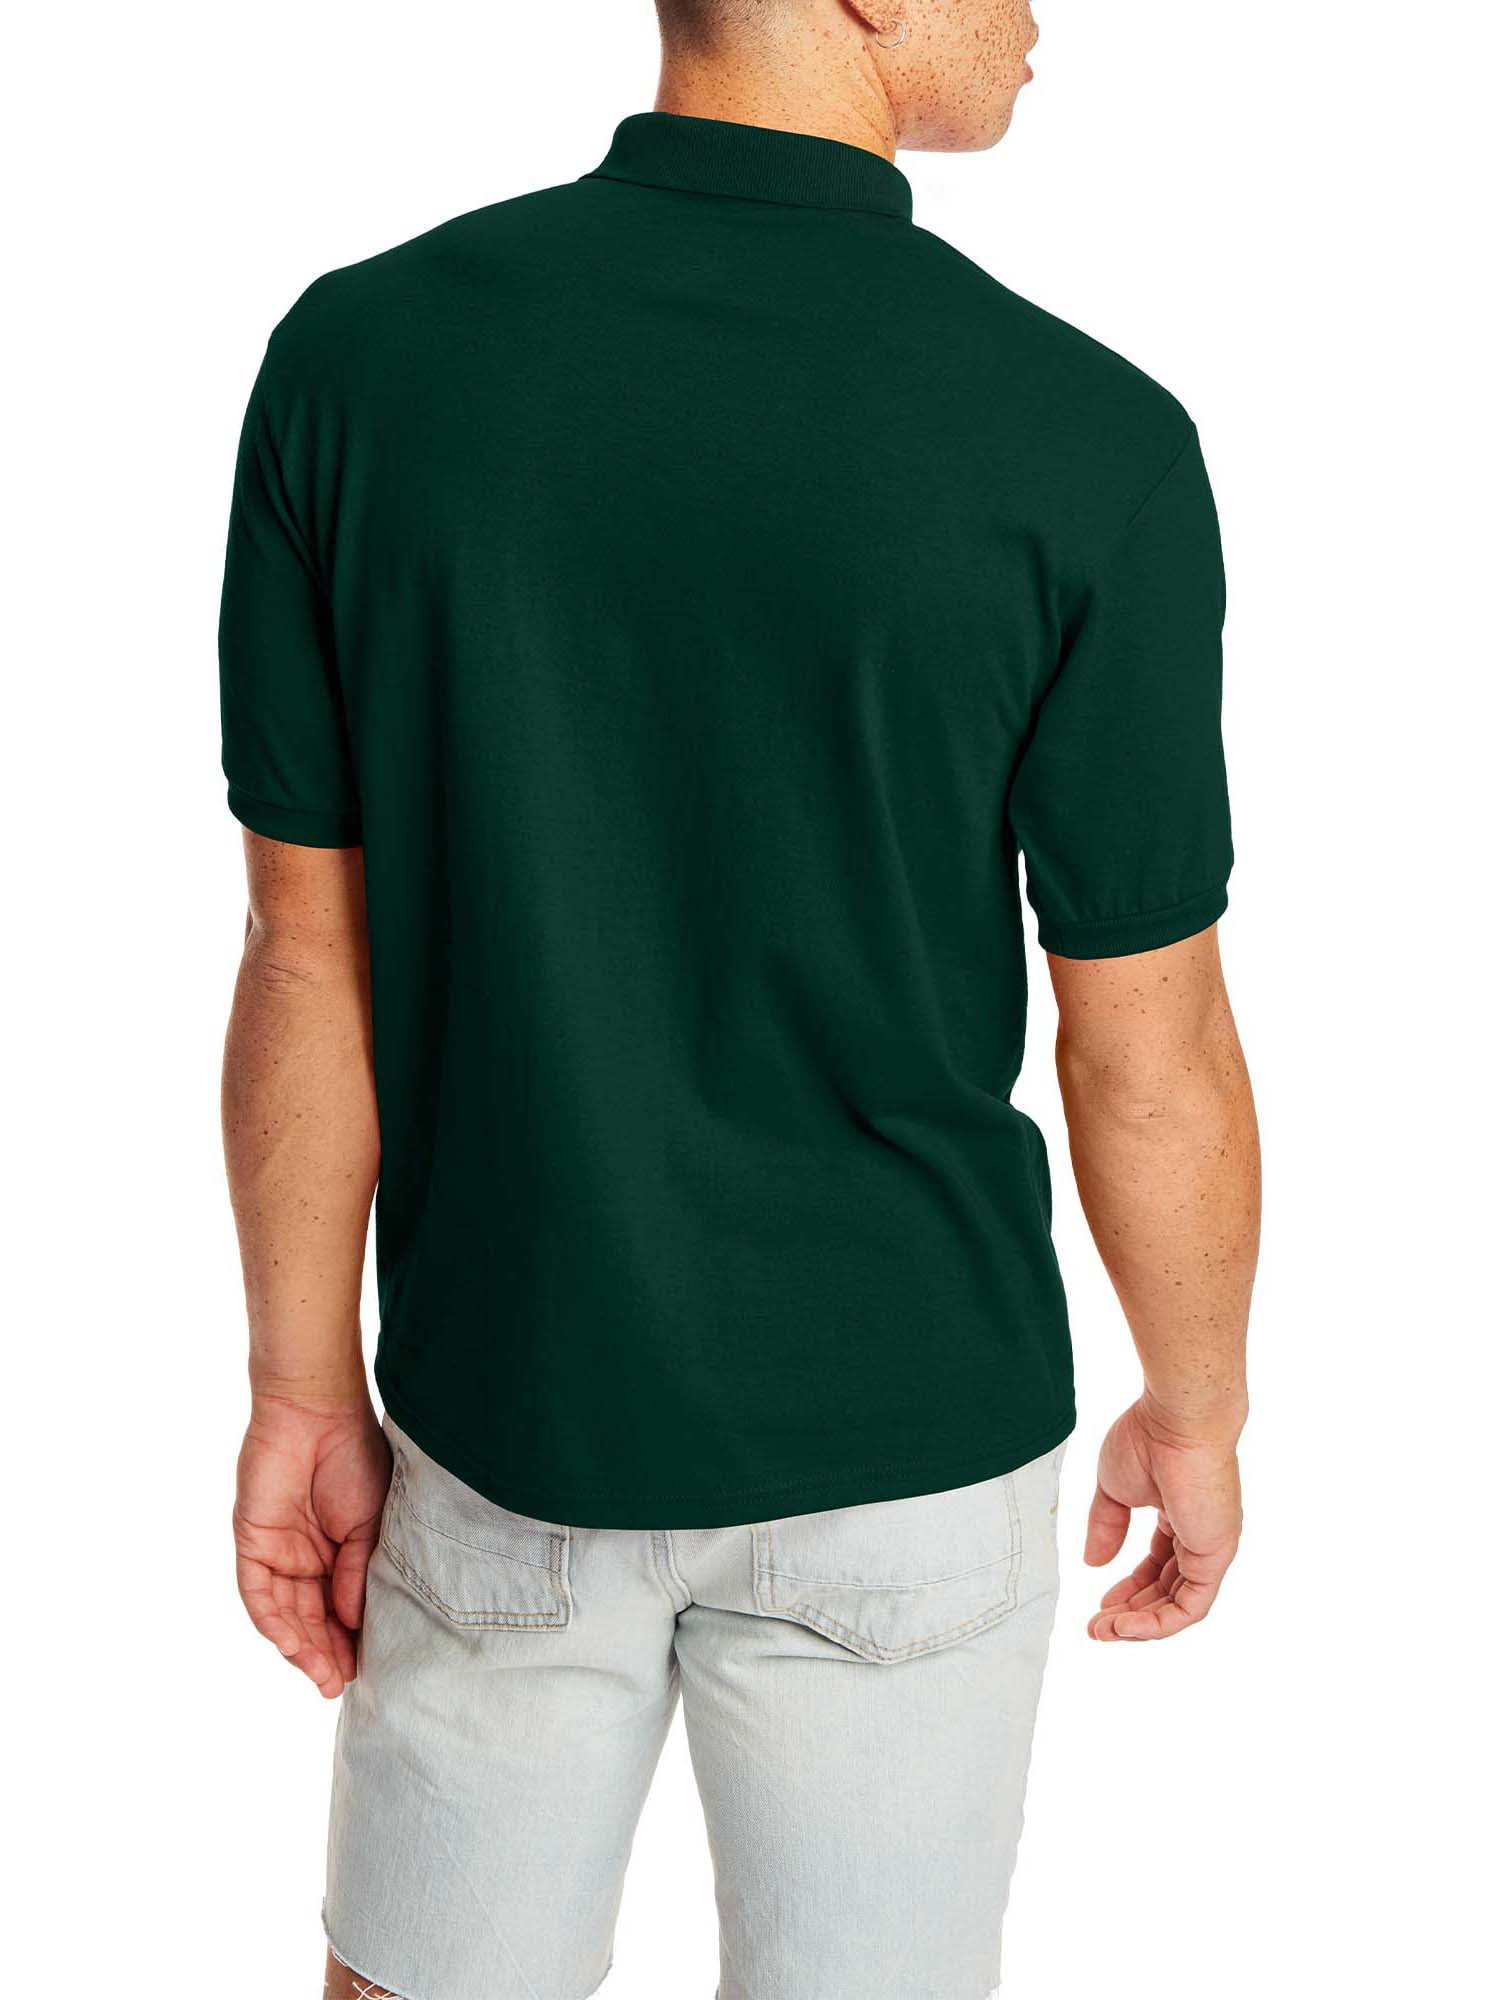 Are These The Best Hanes Slim Fit Tees. : 10 Key Features To Look For In 2022